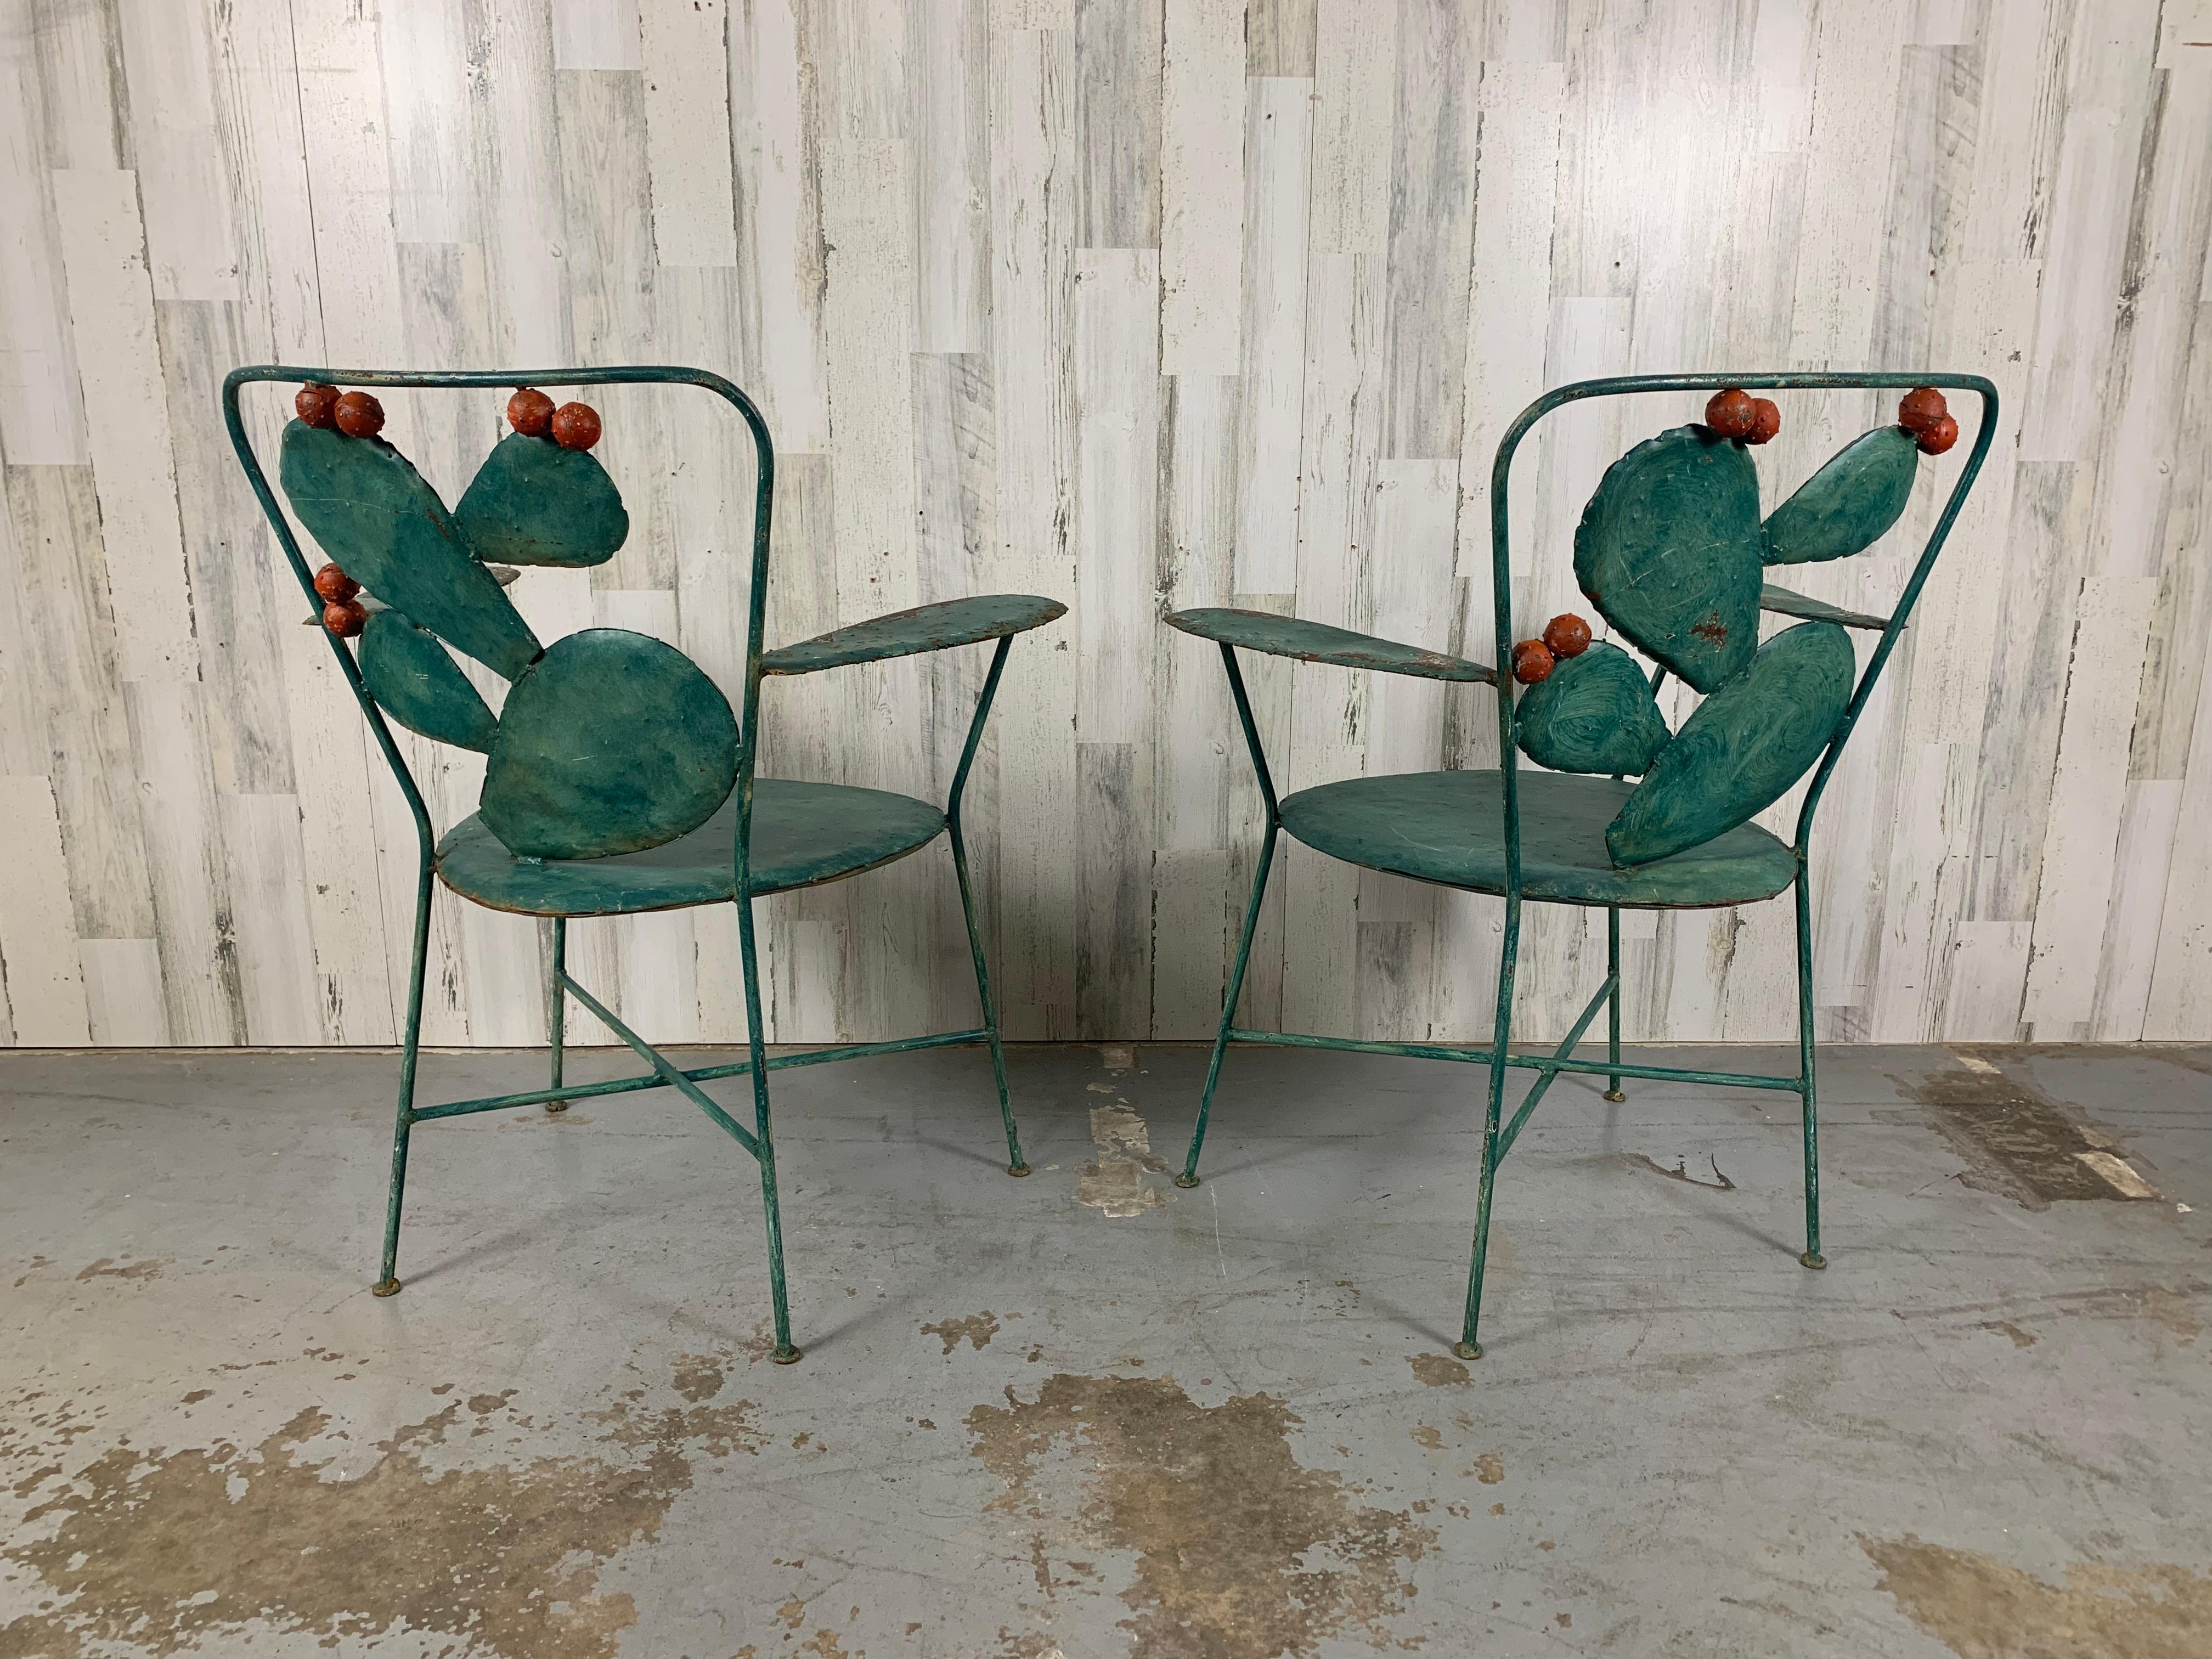 Prickly Pear Garden Chairs 2